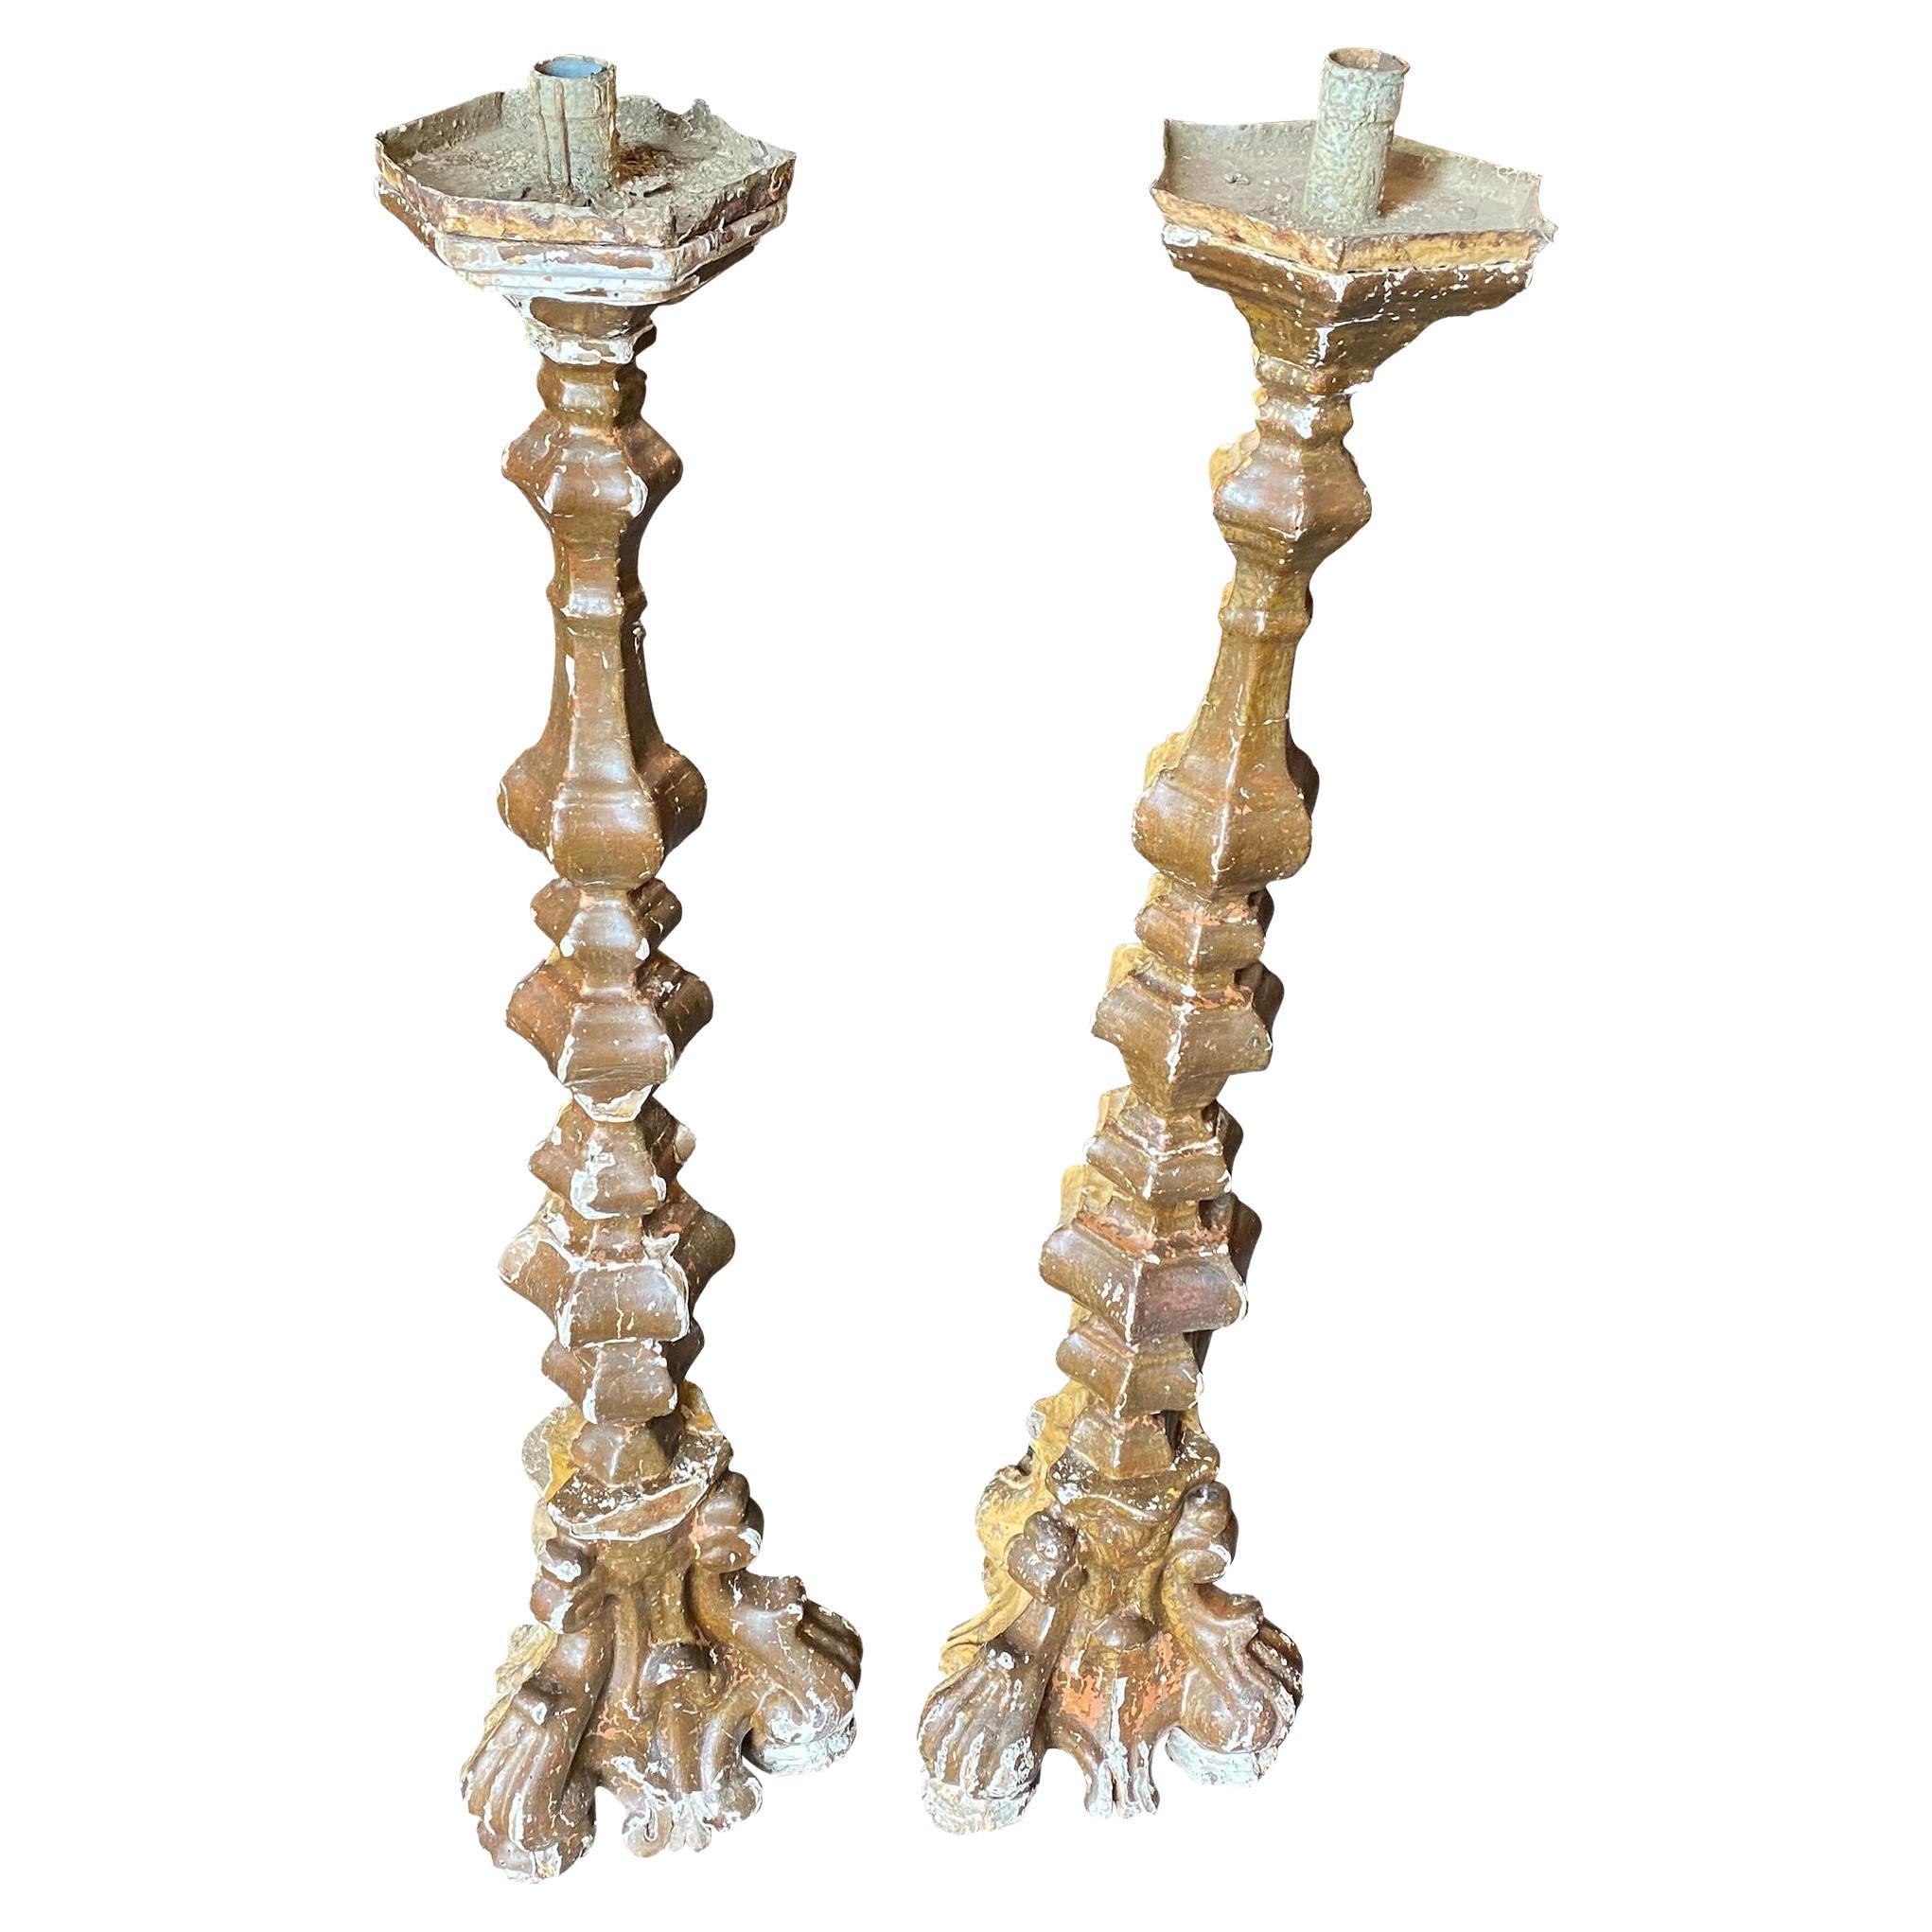 Details about   European Style Replica Torchieres 17th Century  Footed 27" Candlestick 